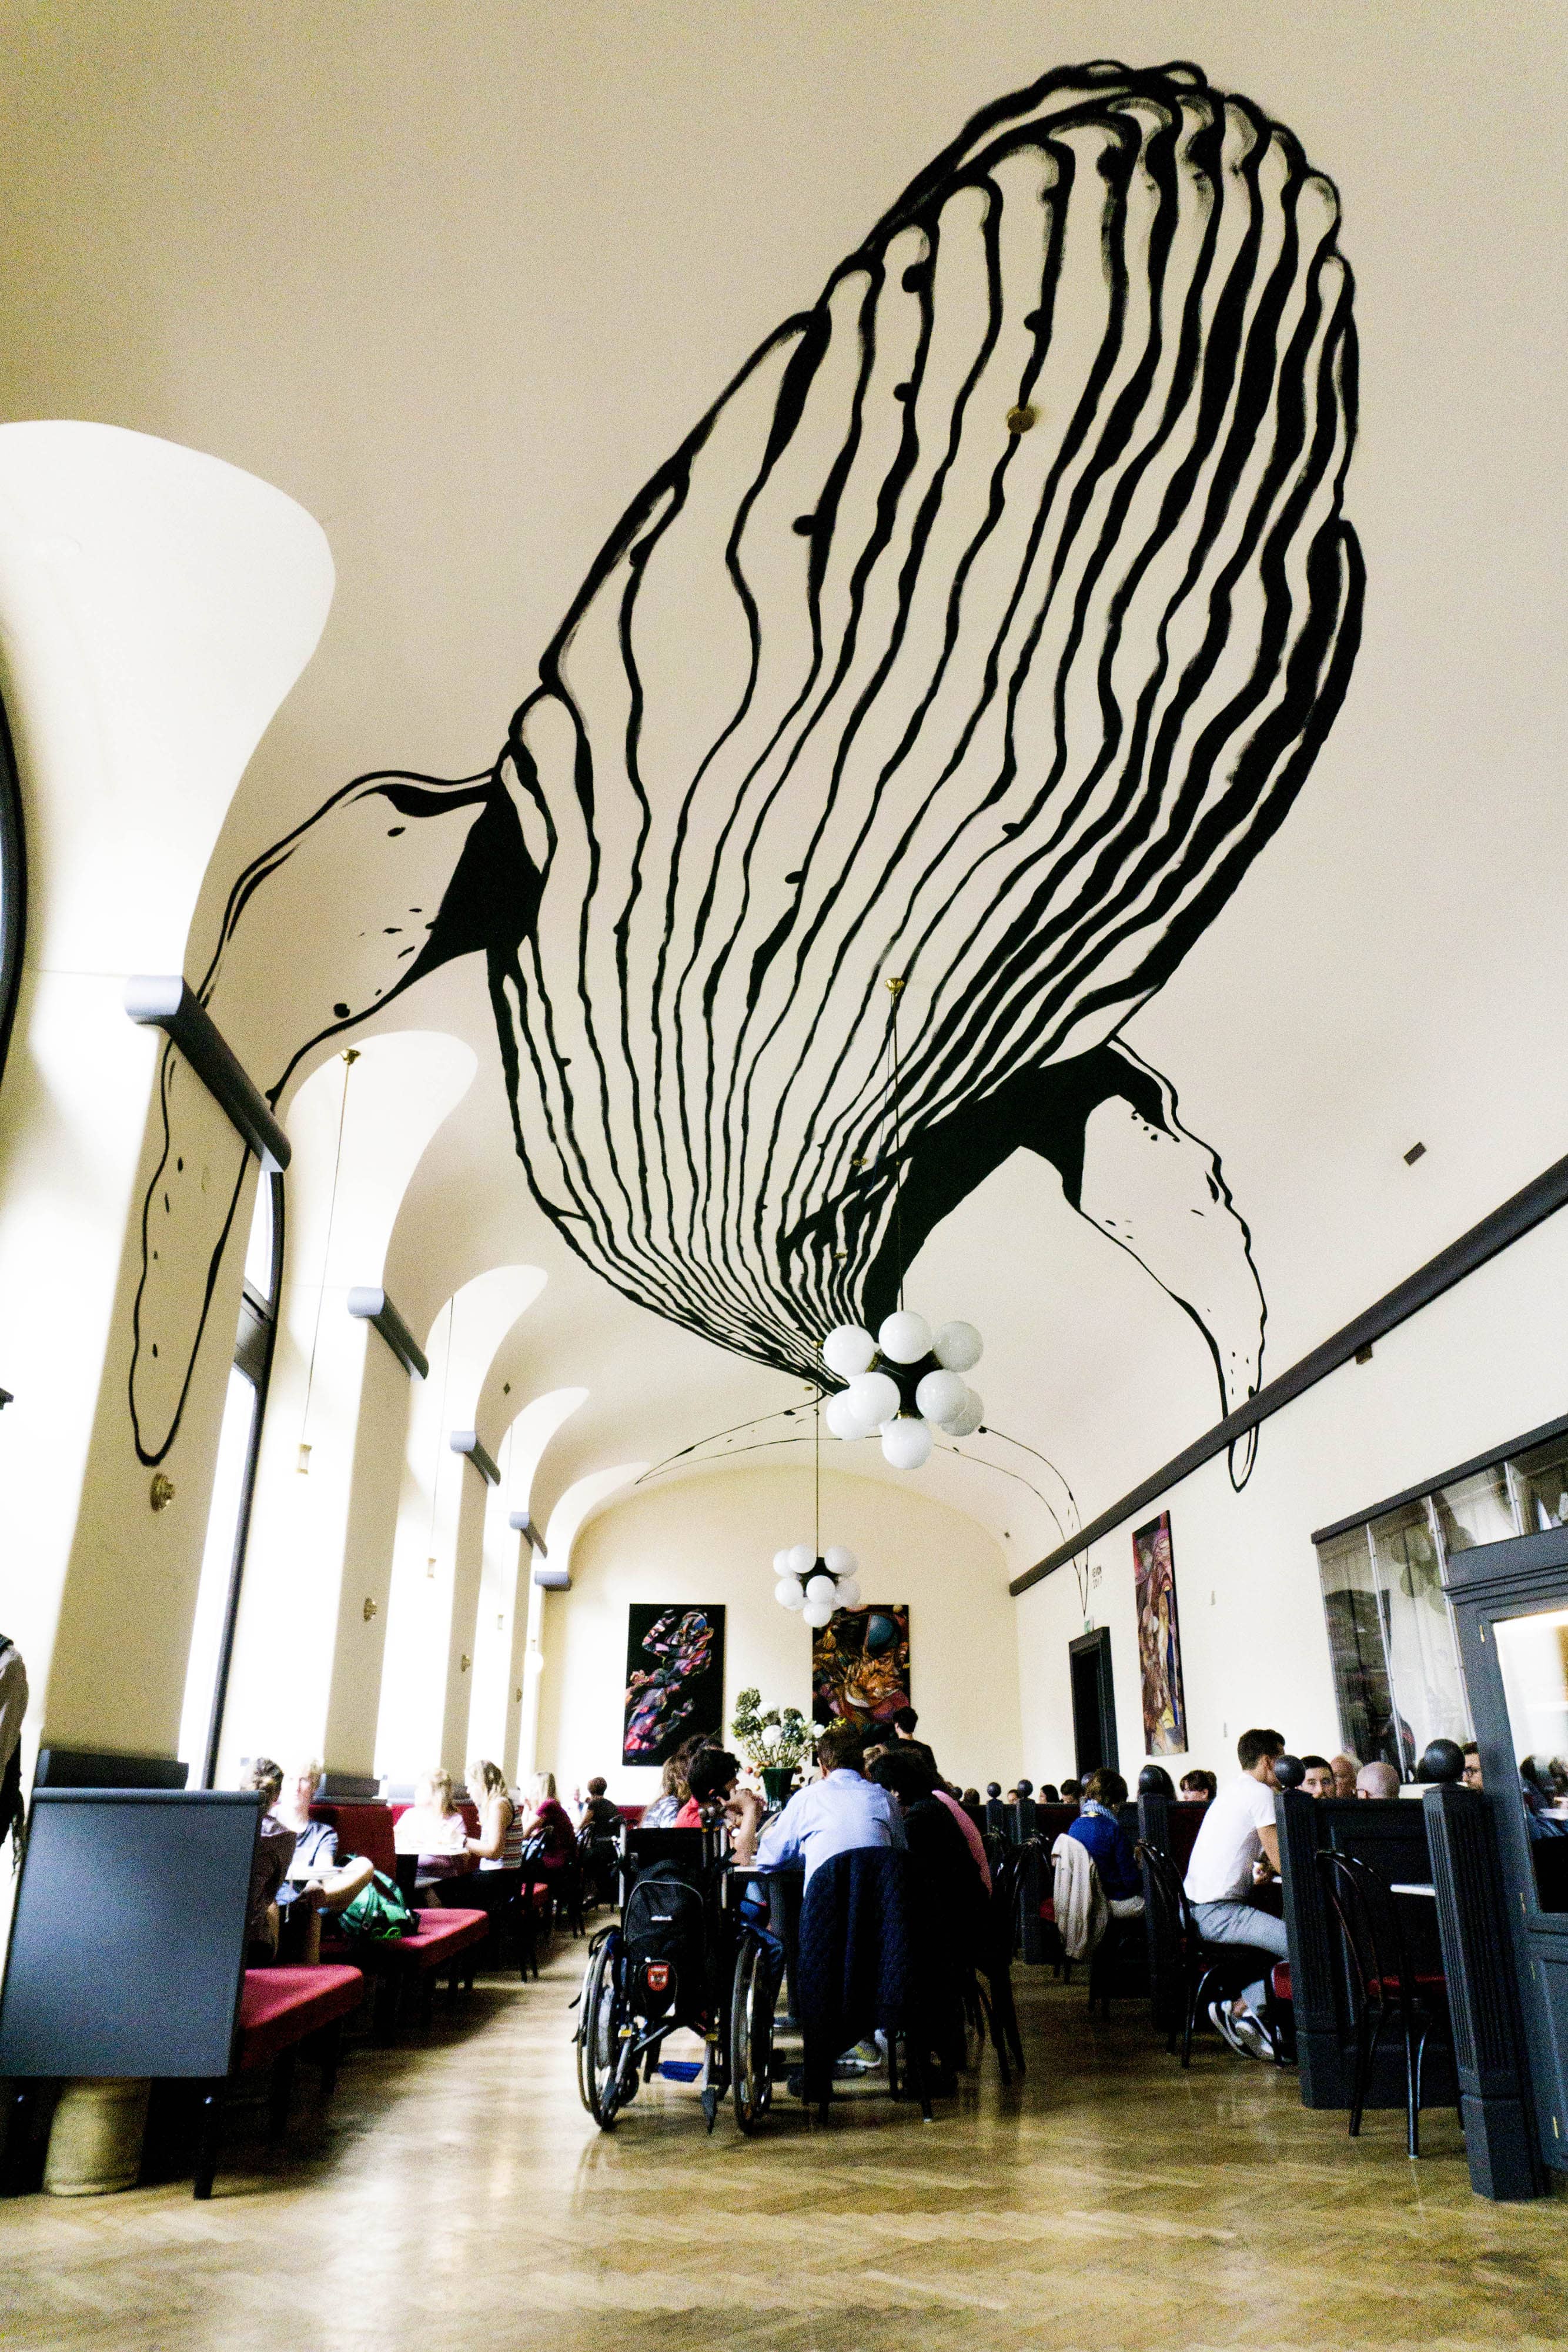 giant ceiling mural of a whale at rien / Cafe Griensteidl Vienna by Sascha Vernik / REVKIN